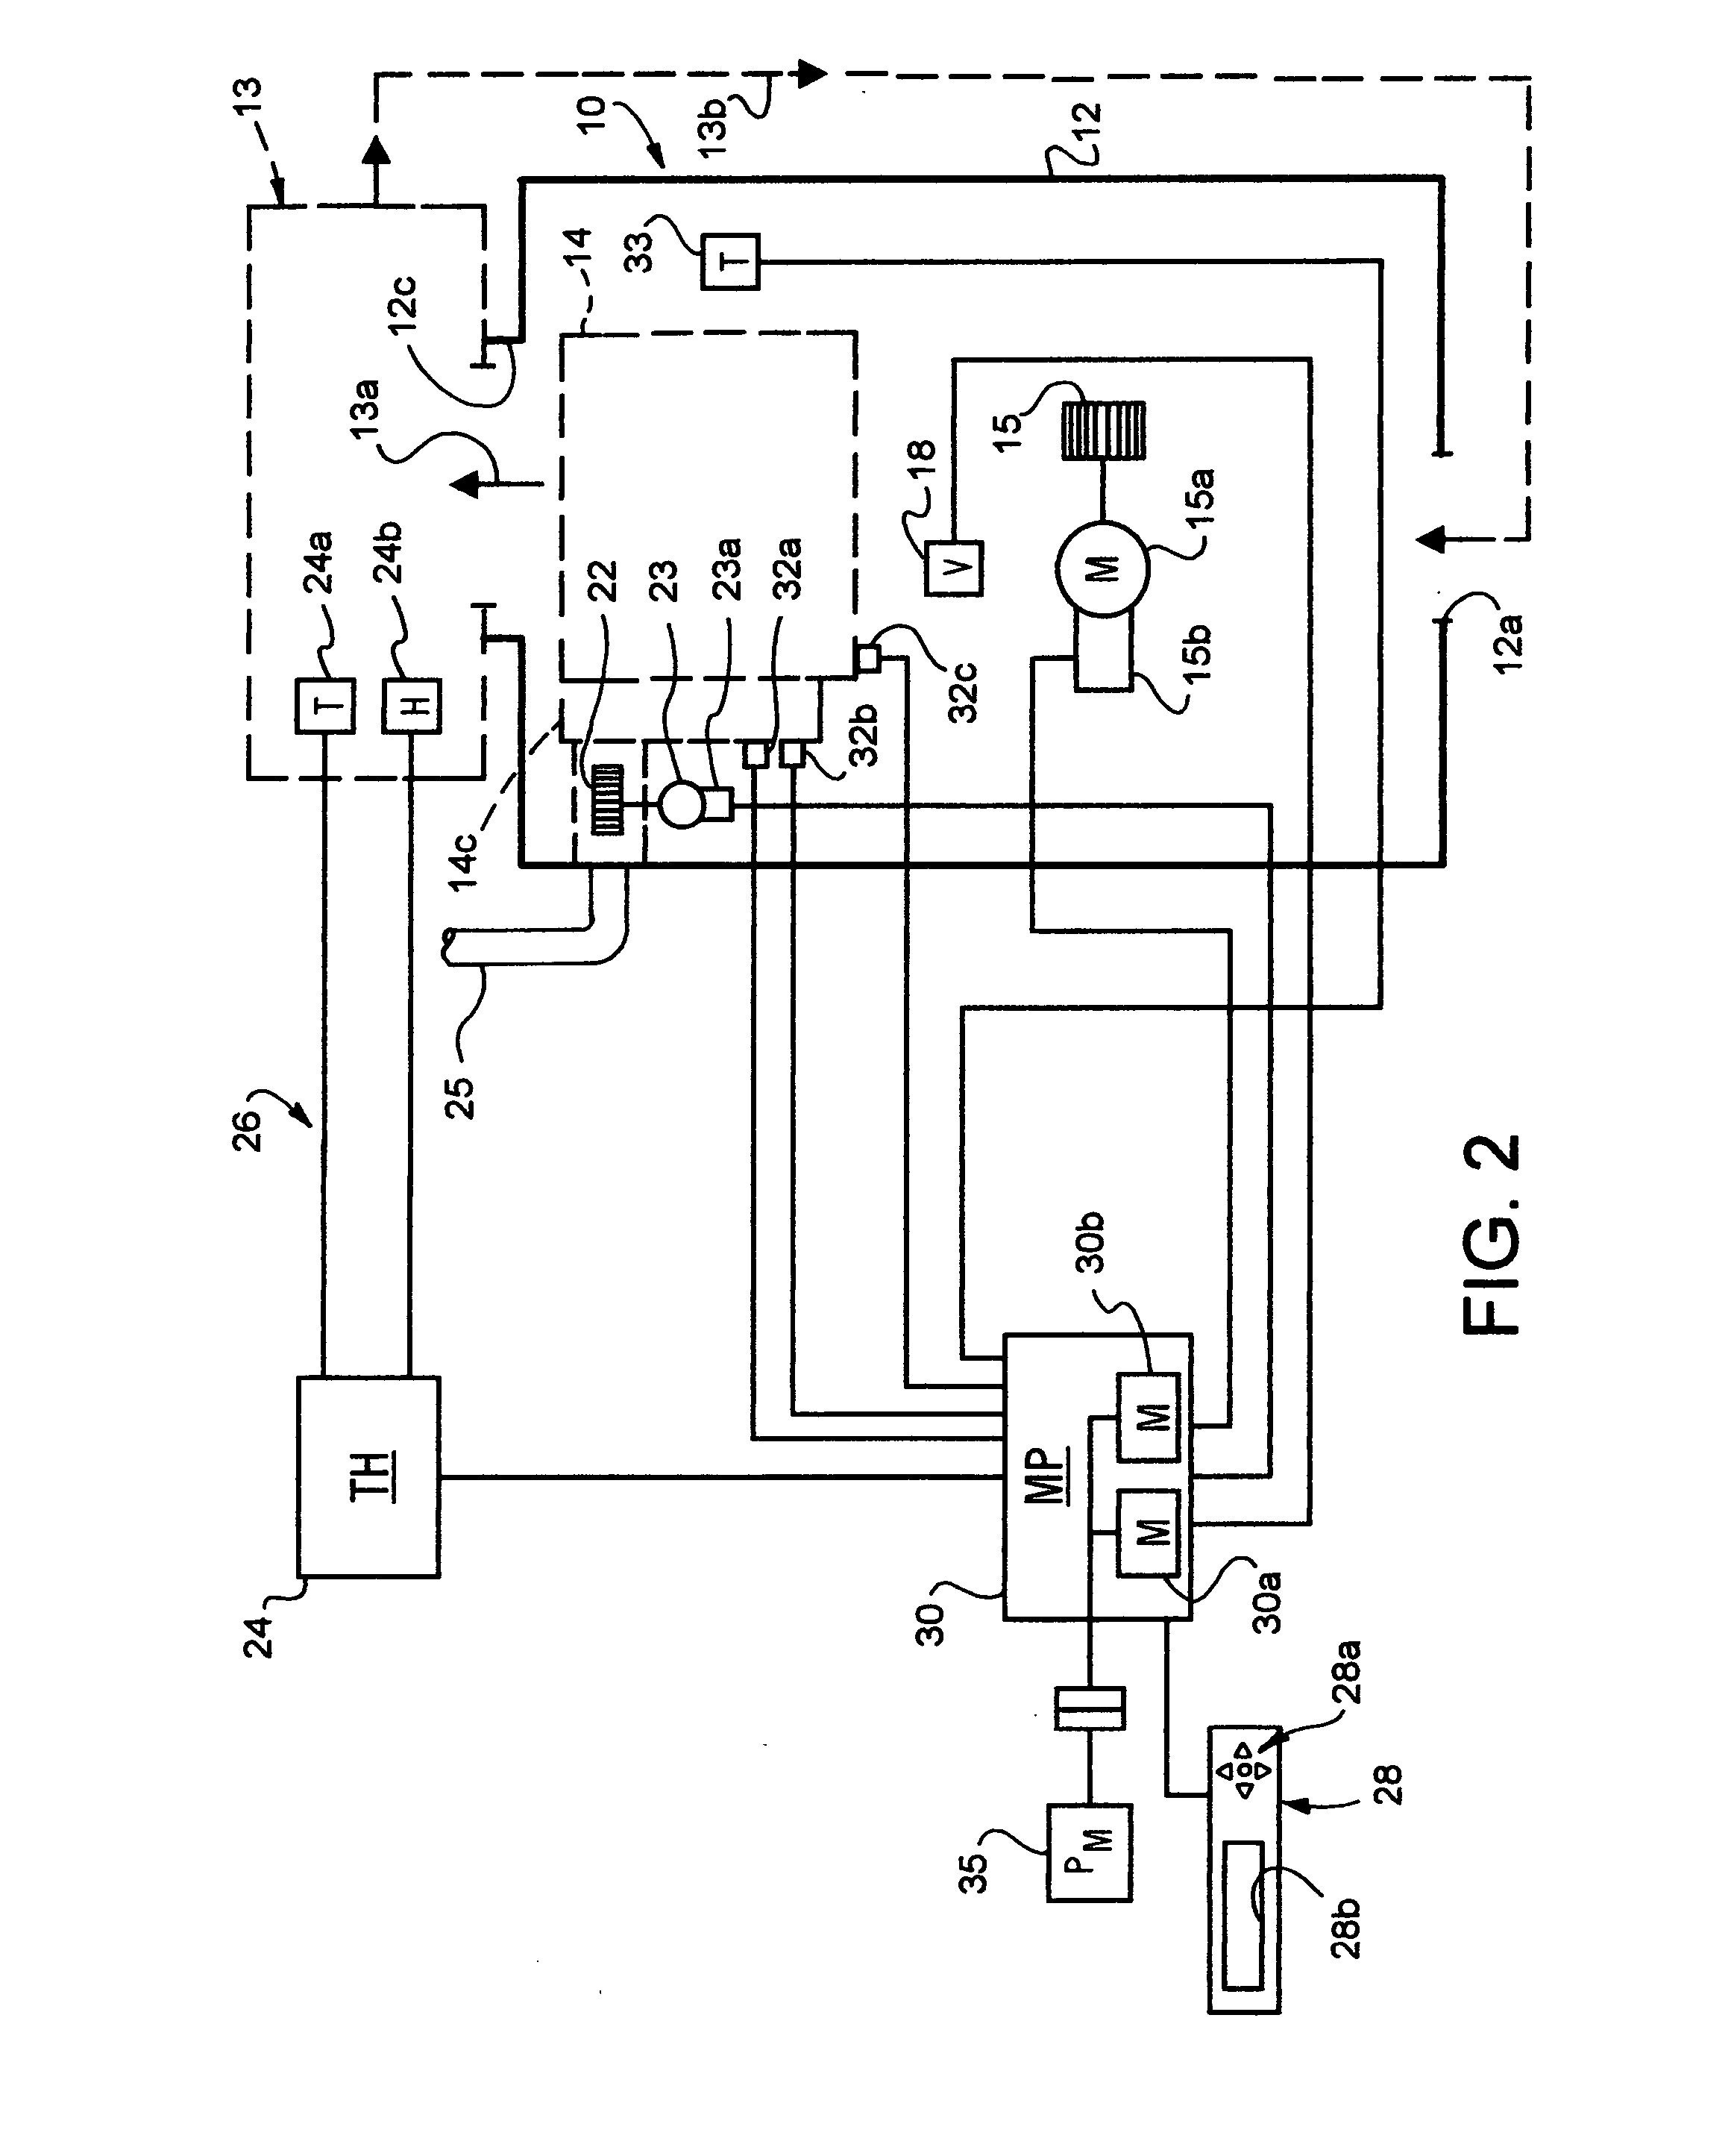 Inducer speed control method for combustion furnace